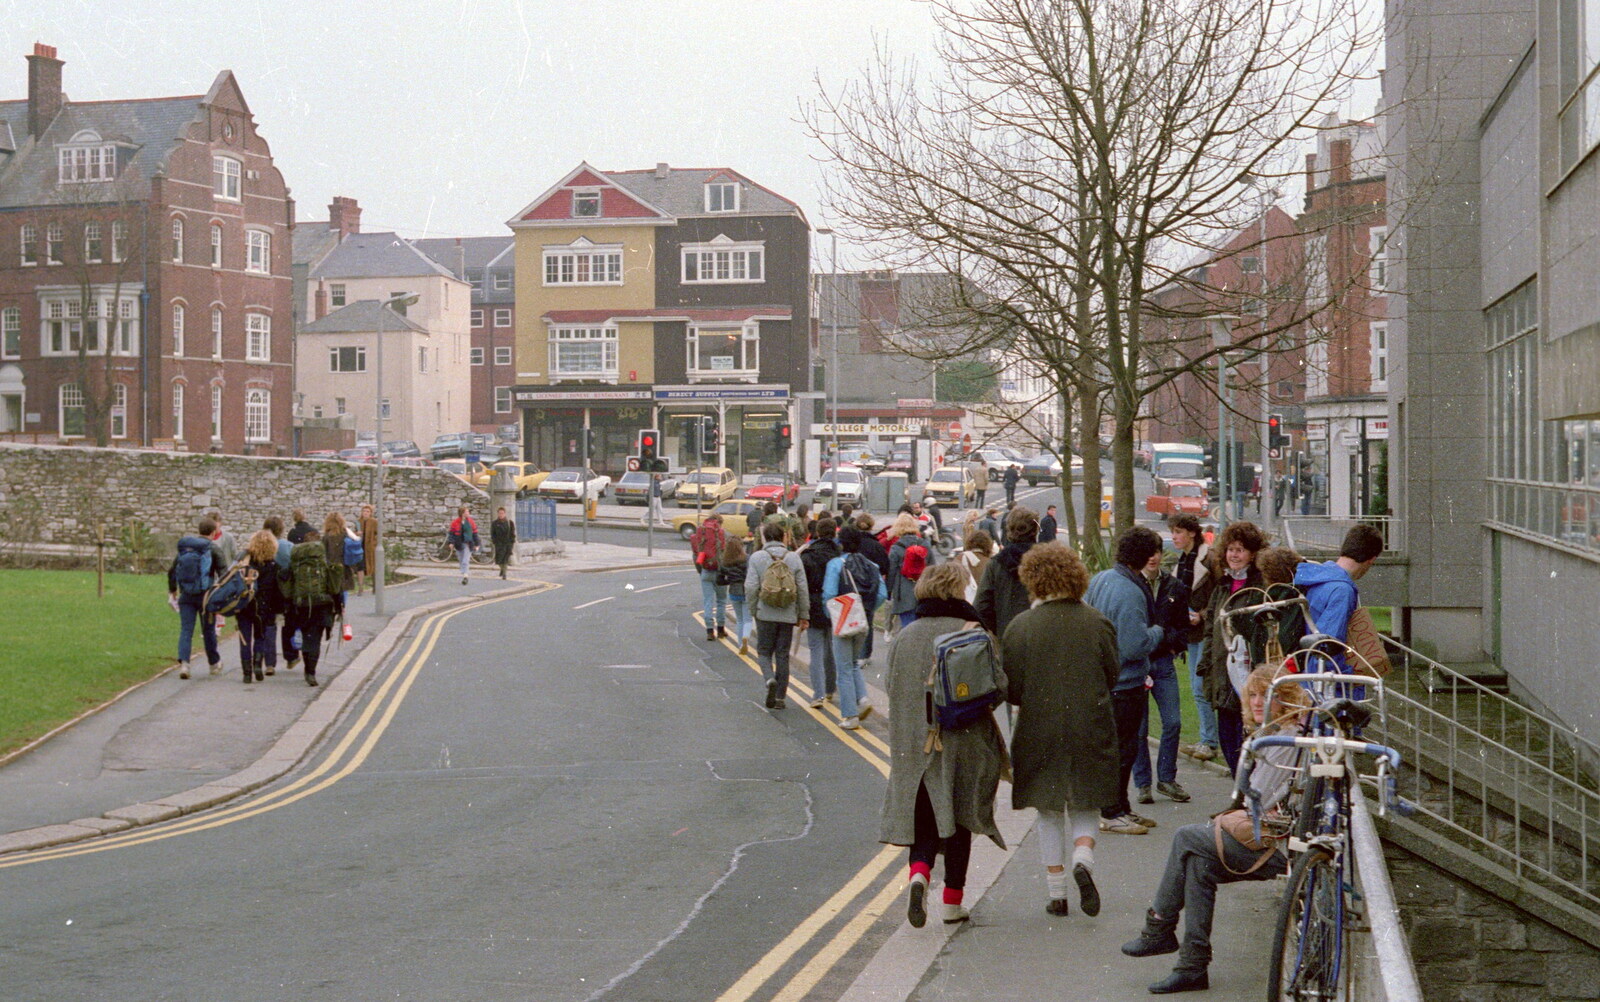 Hitch hikers head down Portland Place from Uni: RAG Week Abseil, Hitch Hike, and Beaumont Street Life Plymouth, Devon - 13th February 1986